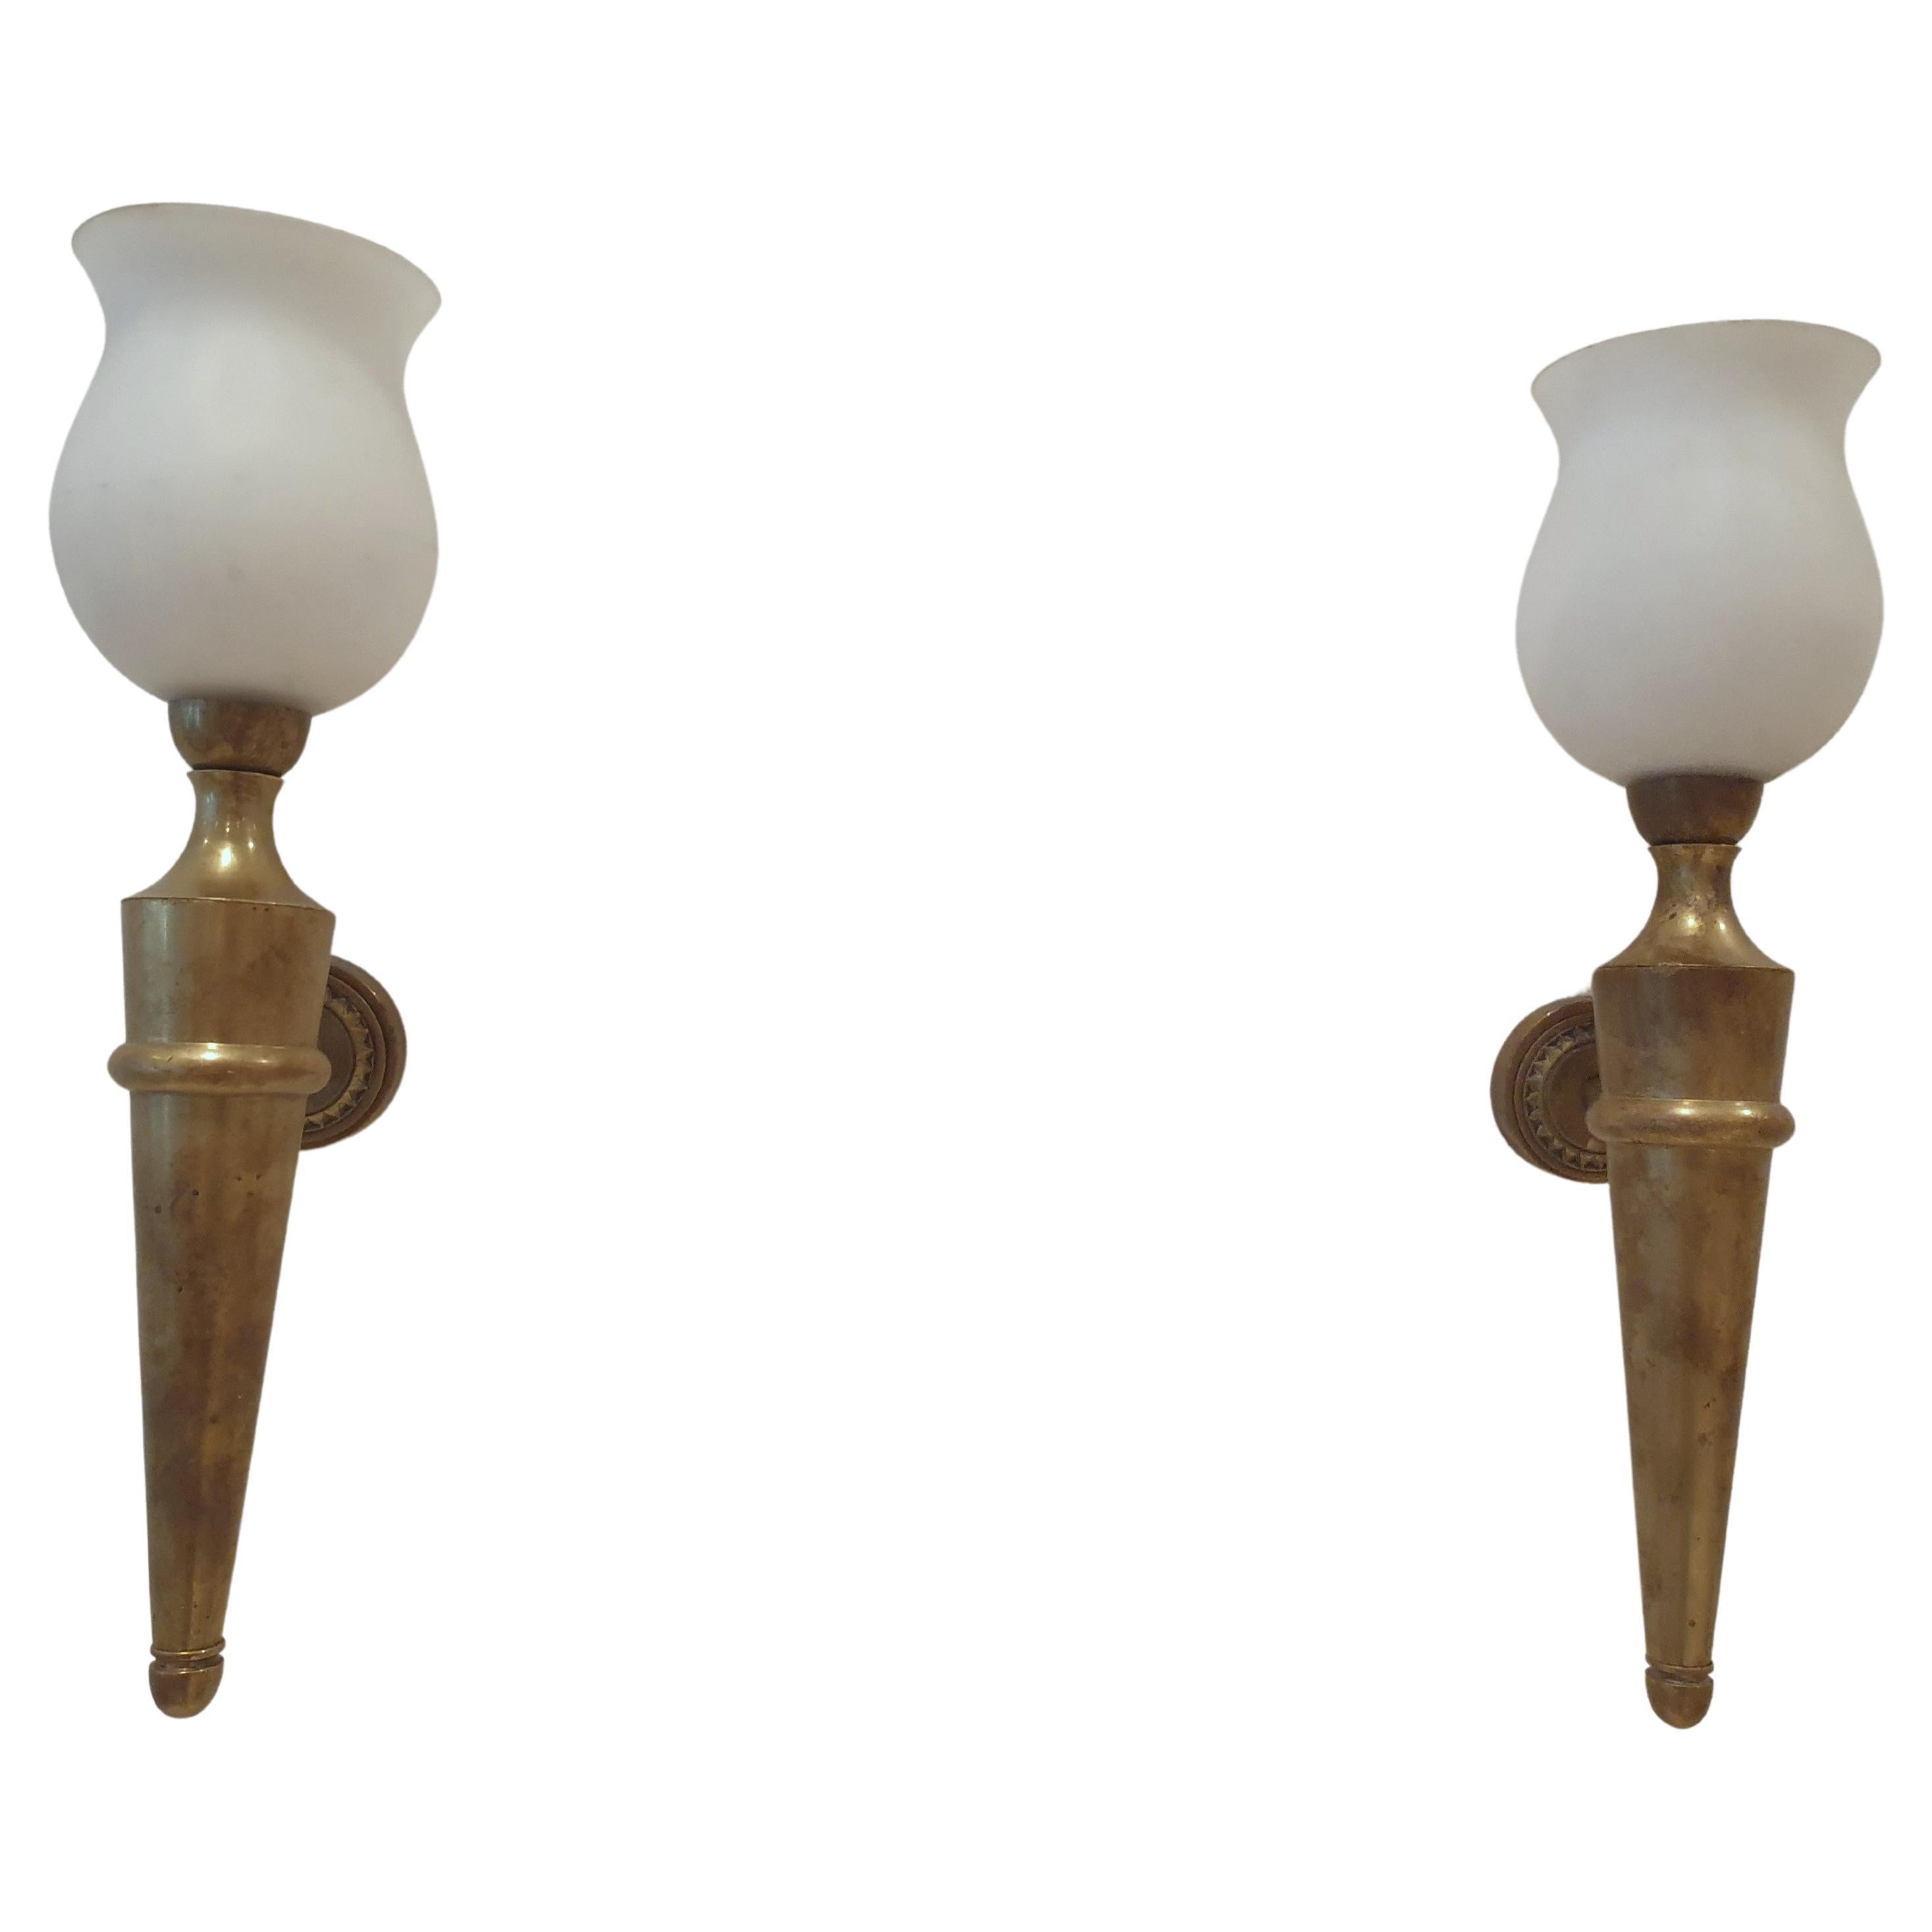 Pair of fine quality patinated bronze wallights by Atelier Jean Perzel. They come complete with original glass shades. These elegant wallights are finely detailed and of a heavy weight denoting quality and are in the classical form of torcheres. 